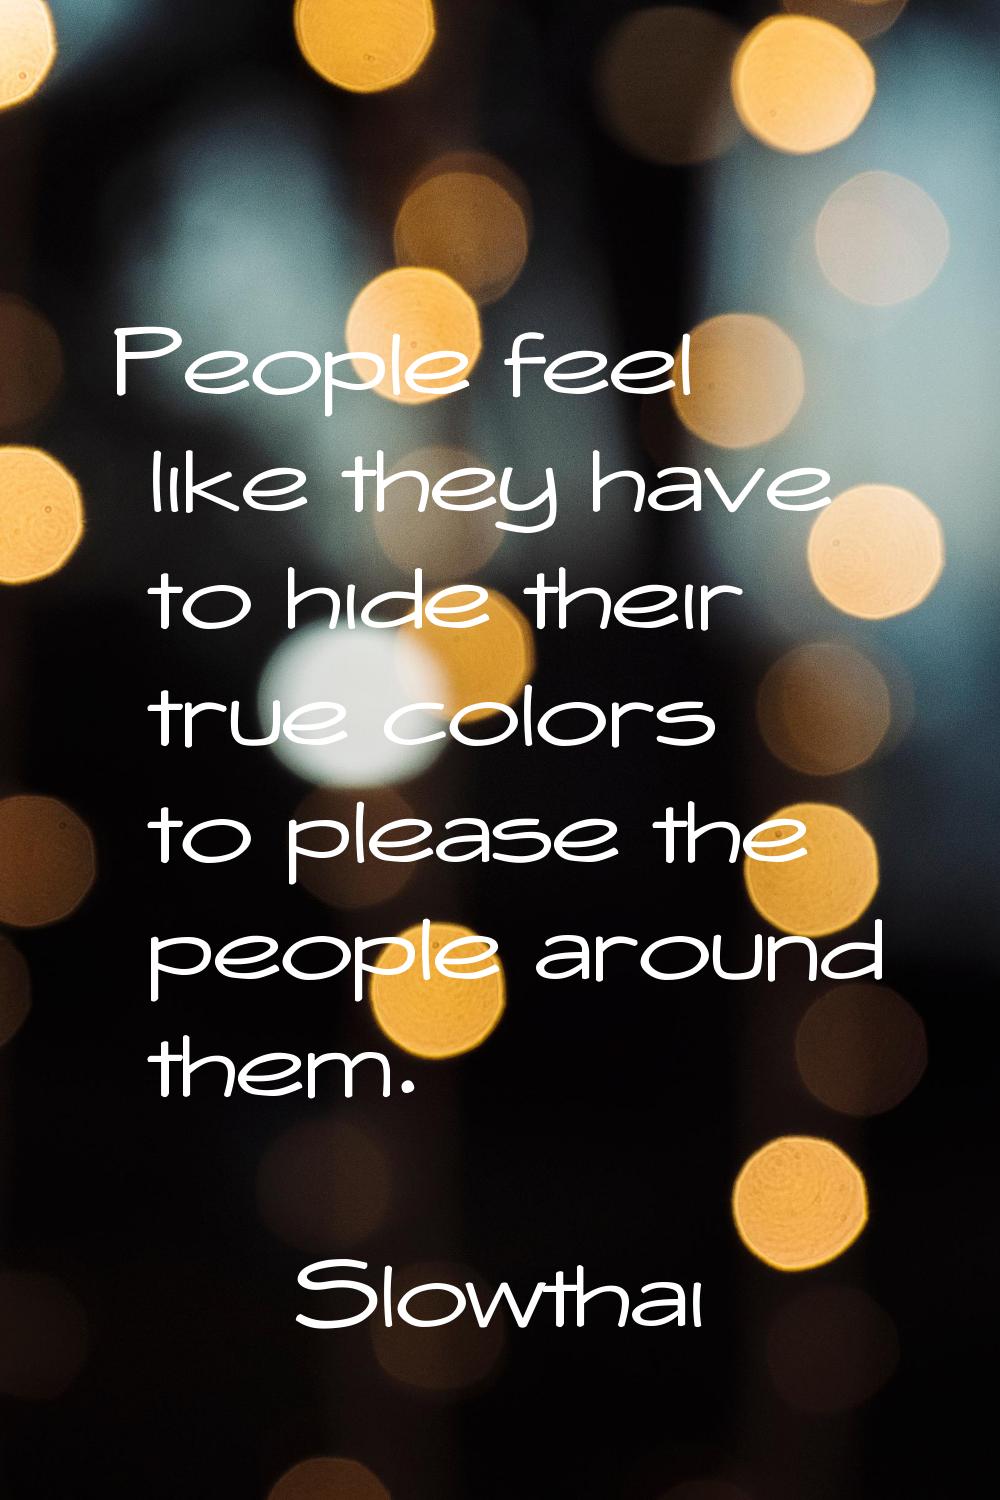 People feel like they have to hide their true colors to please the people around them.